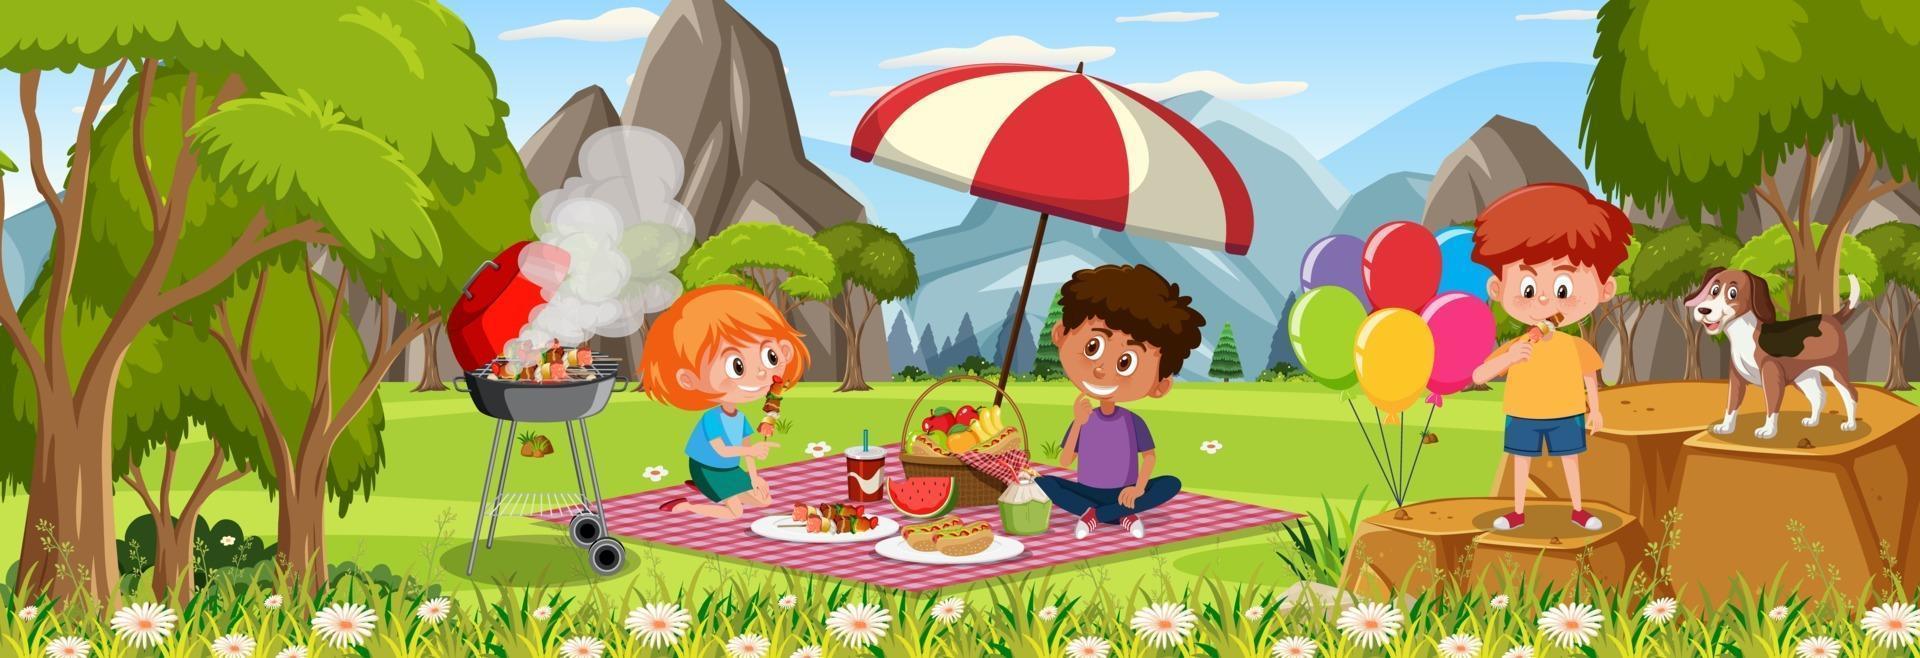 Outdoor horizontal scene with many kids picnic at the park vector